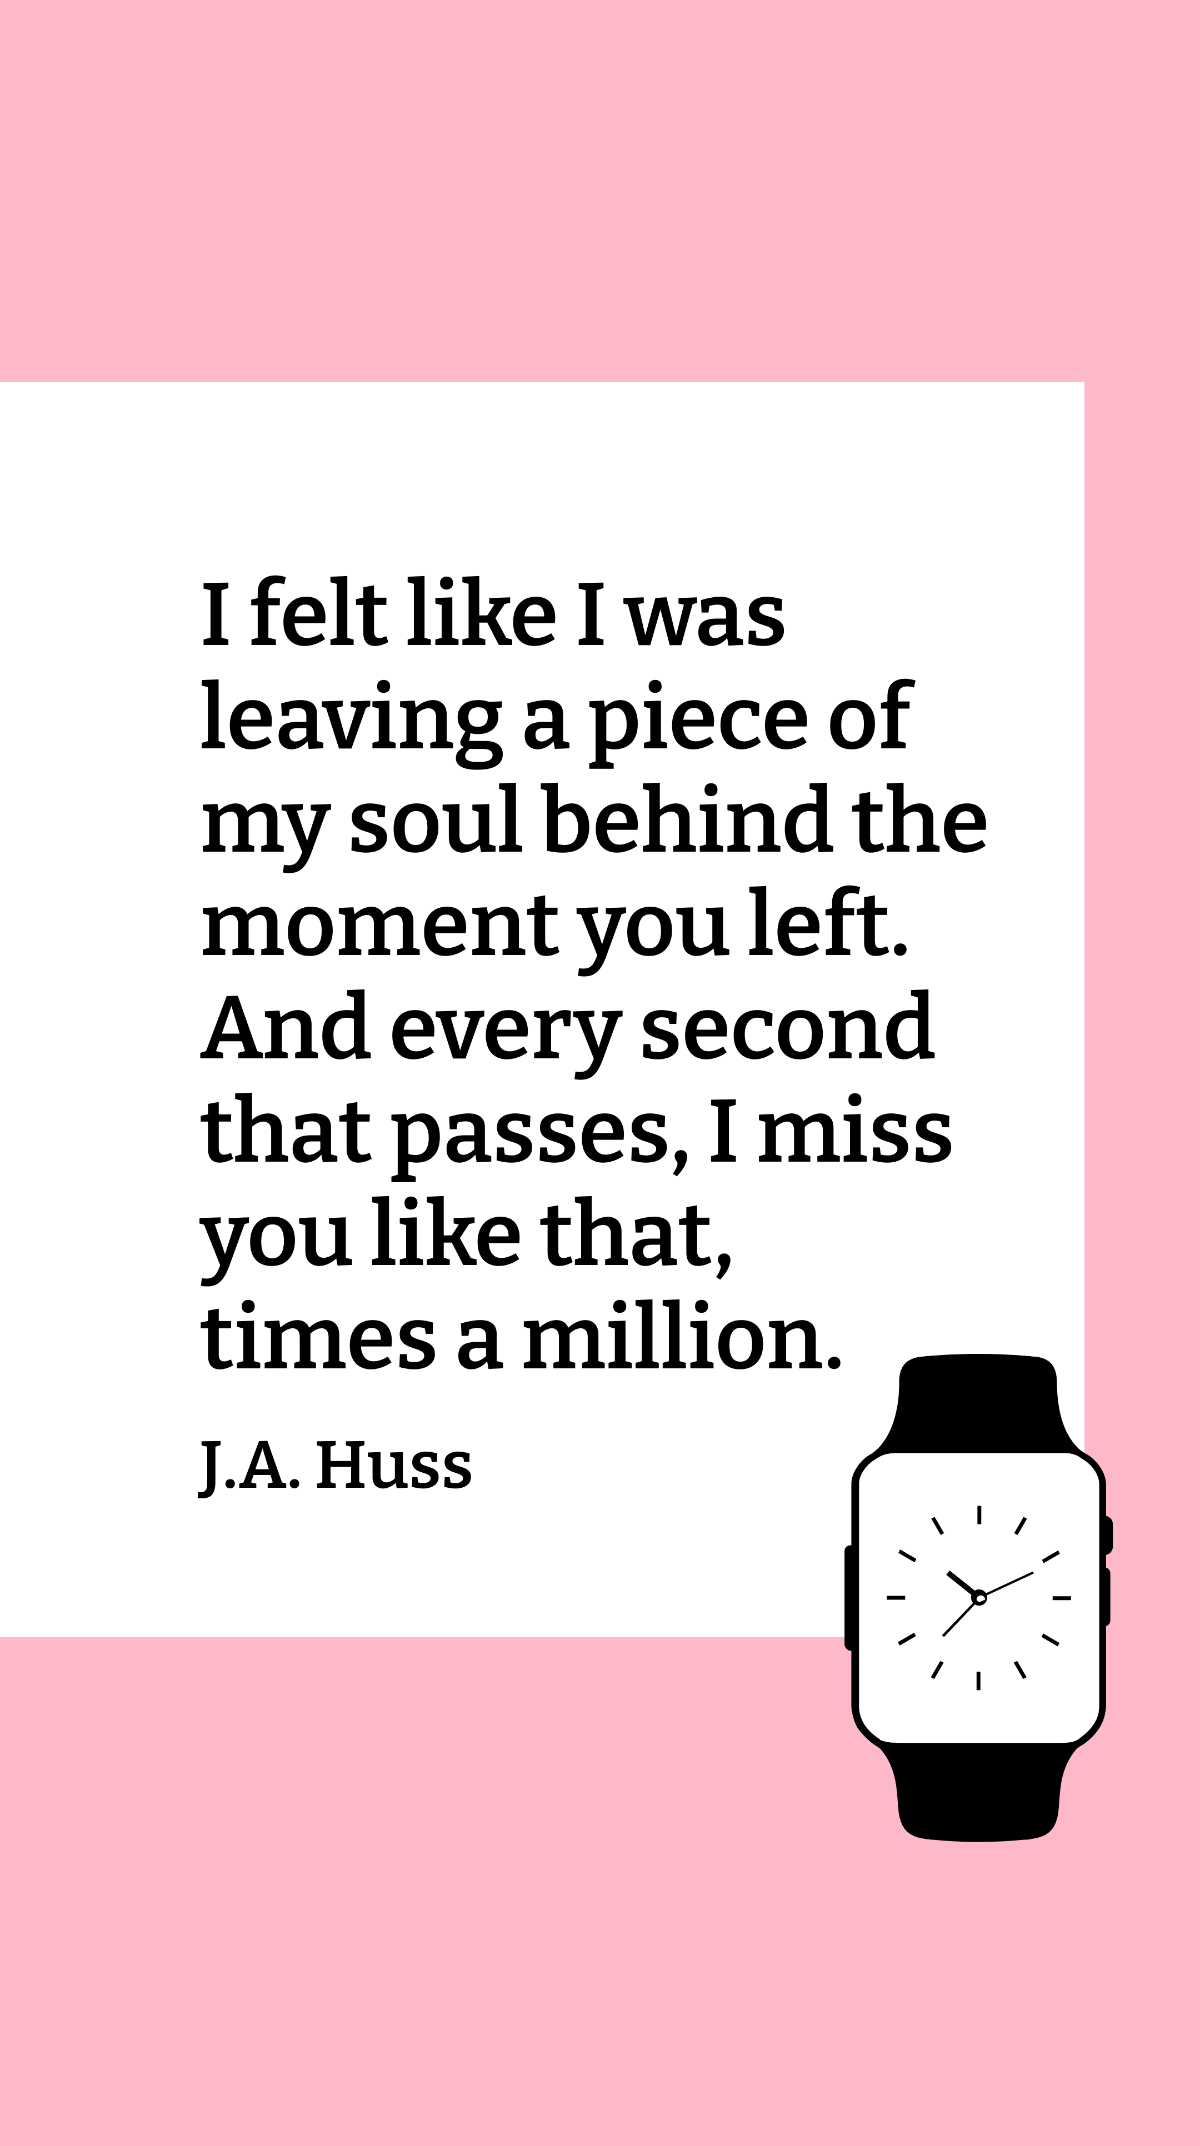 J.A. Huss - I felt like I was leaving a piece of my soul behind the moment you left. And every second that passes, I miss you like that, times a million.